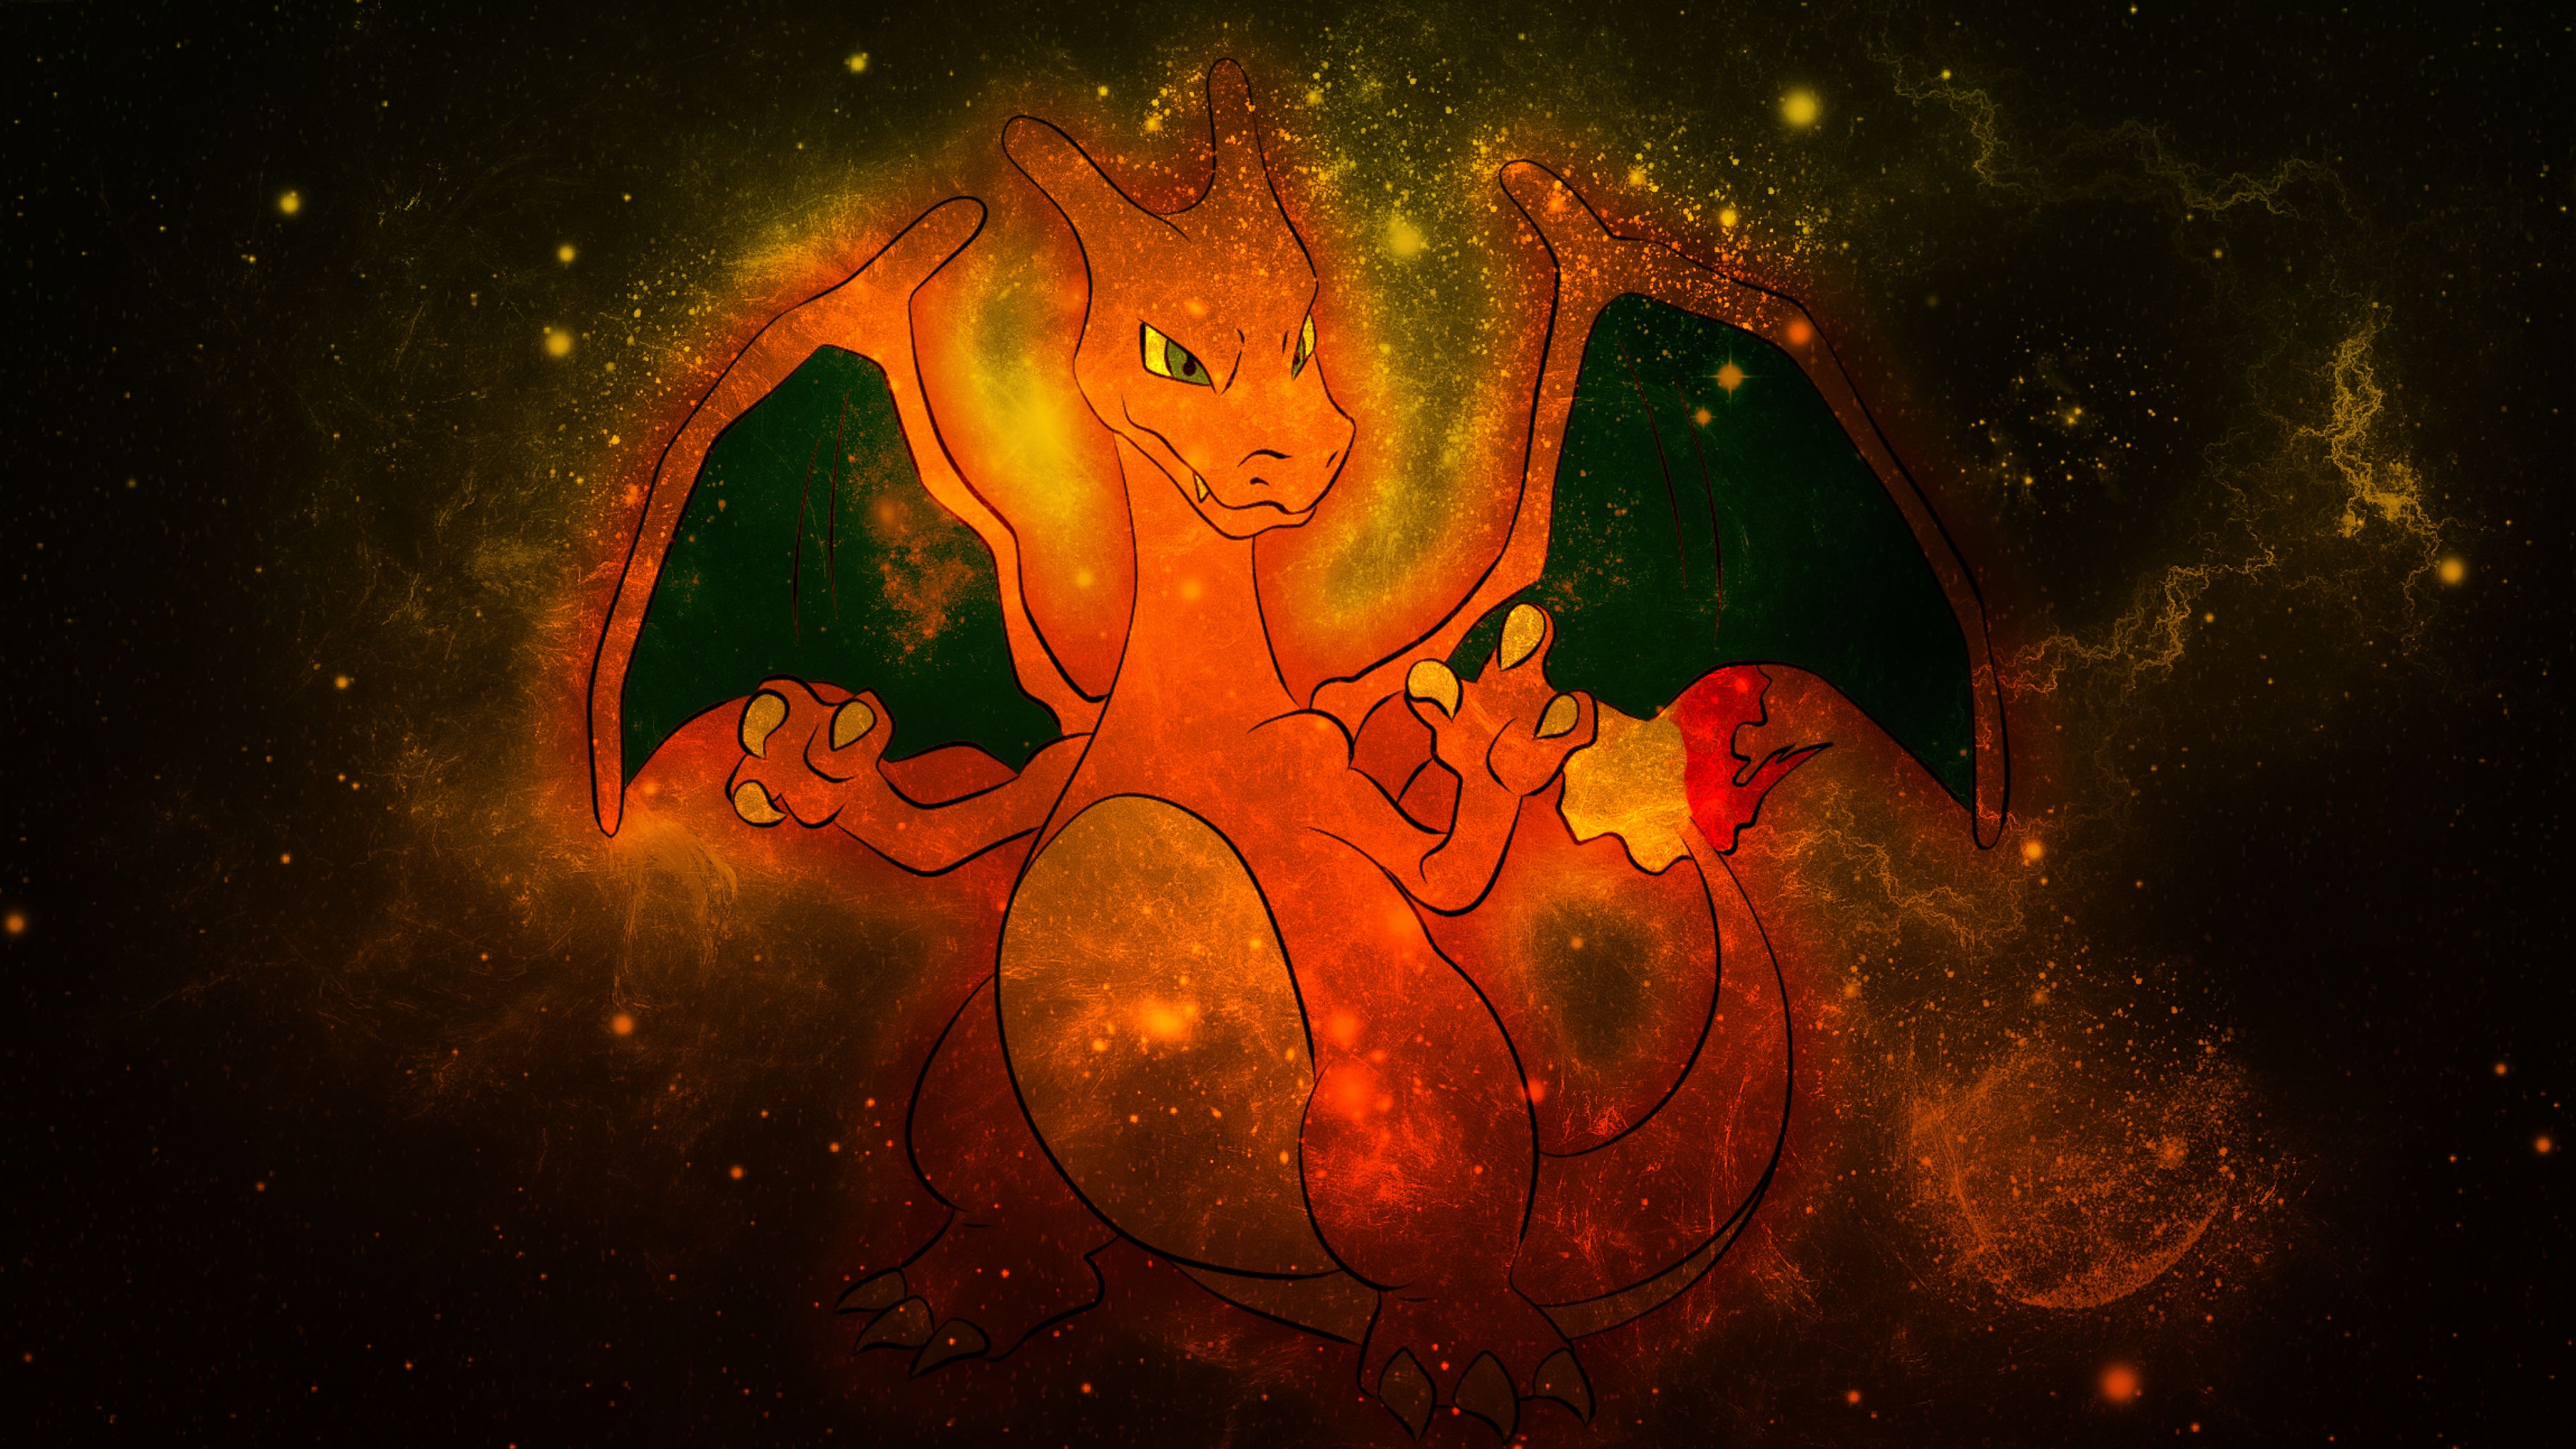 Charizard 4k Pc Wallpapers Wallpaper Cave